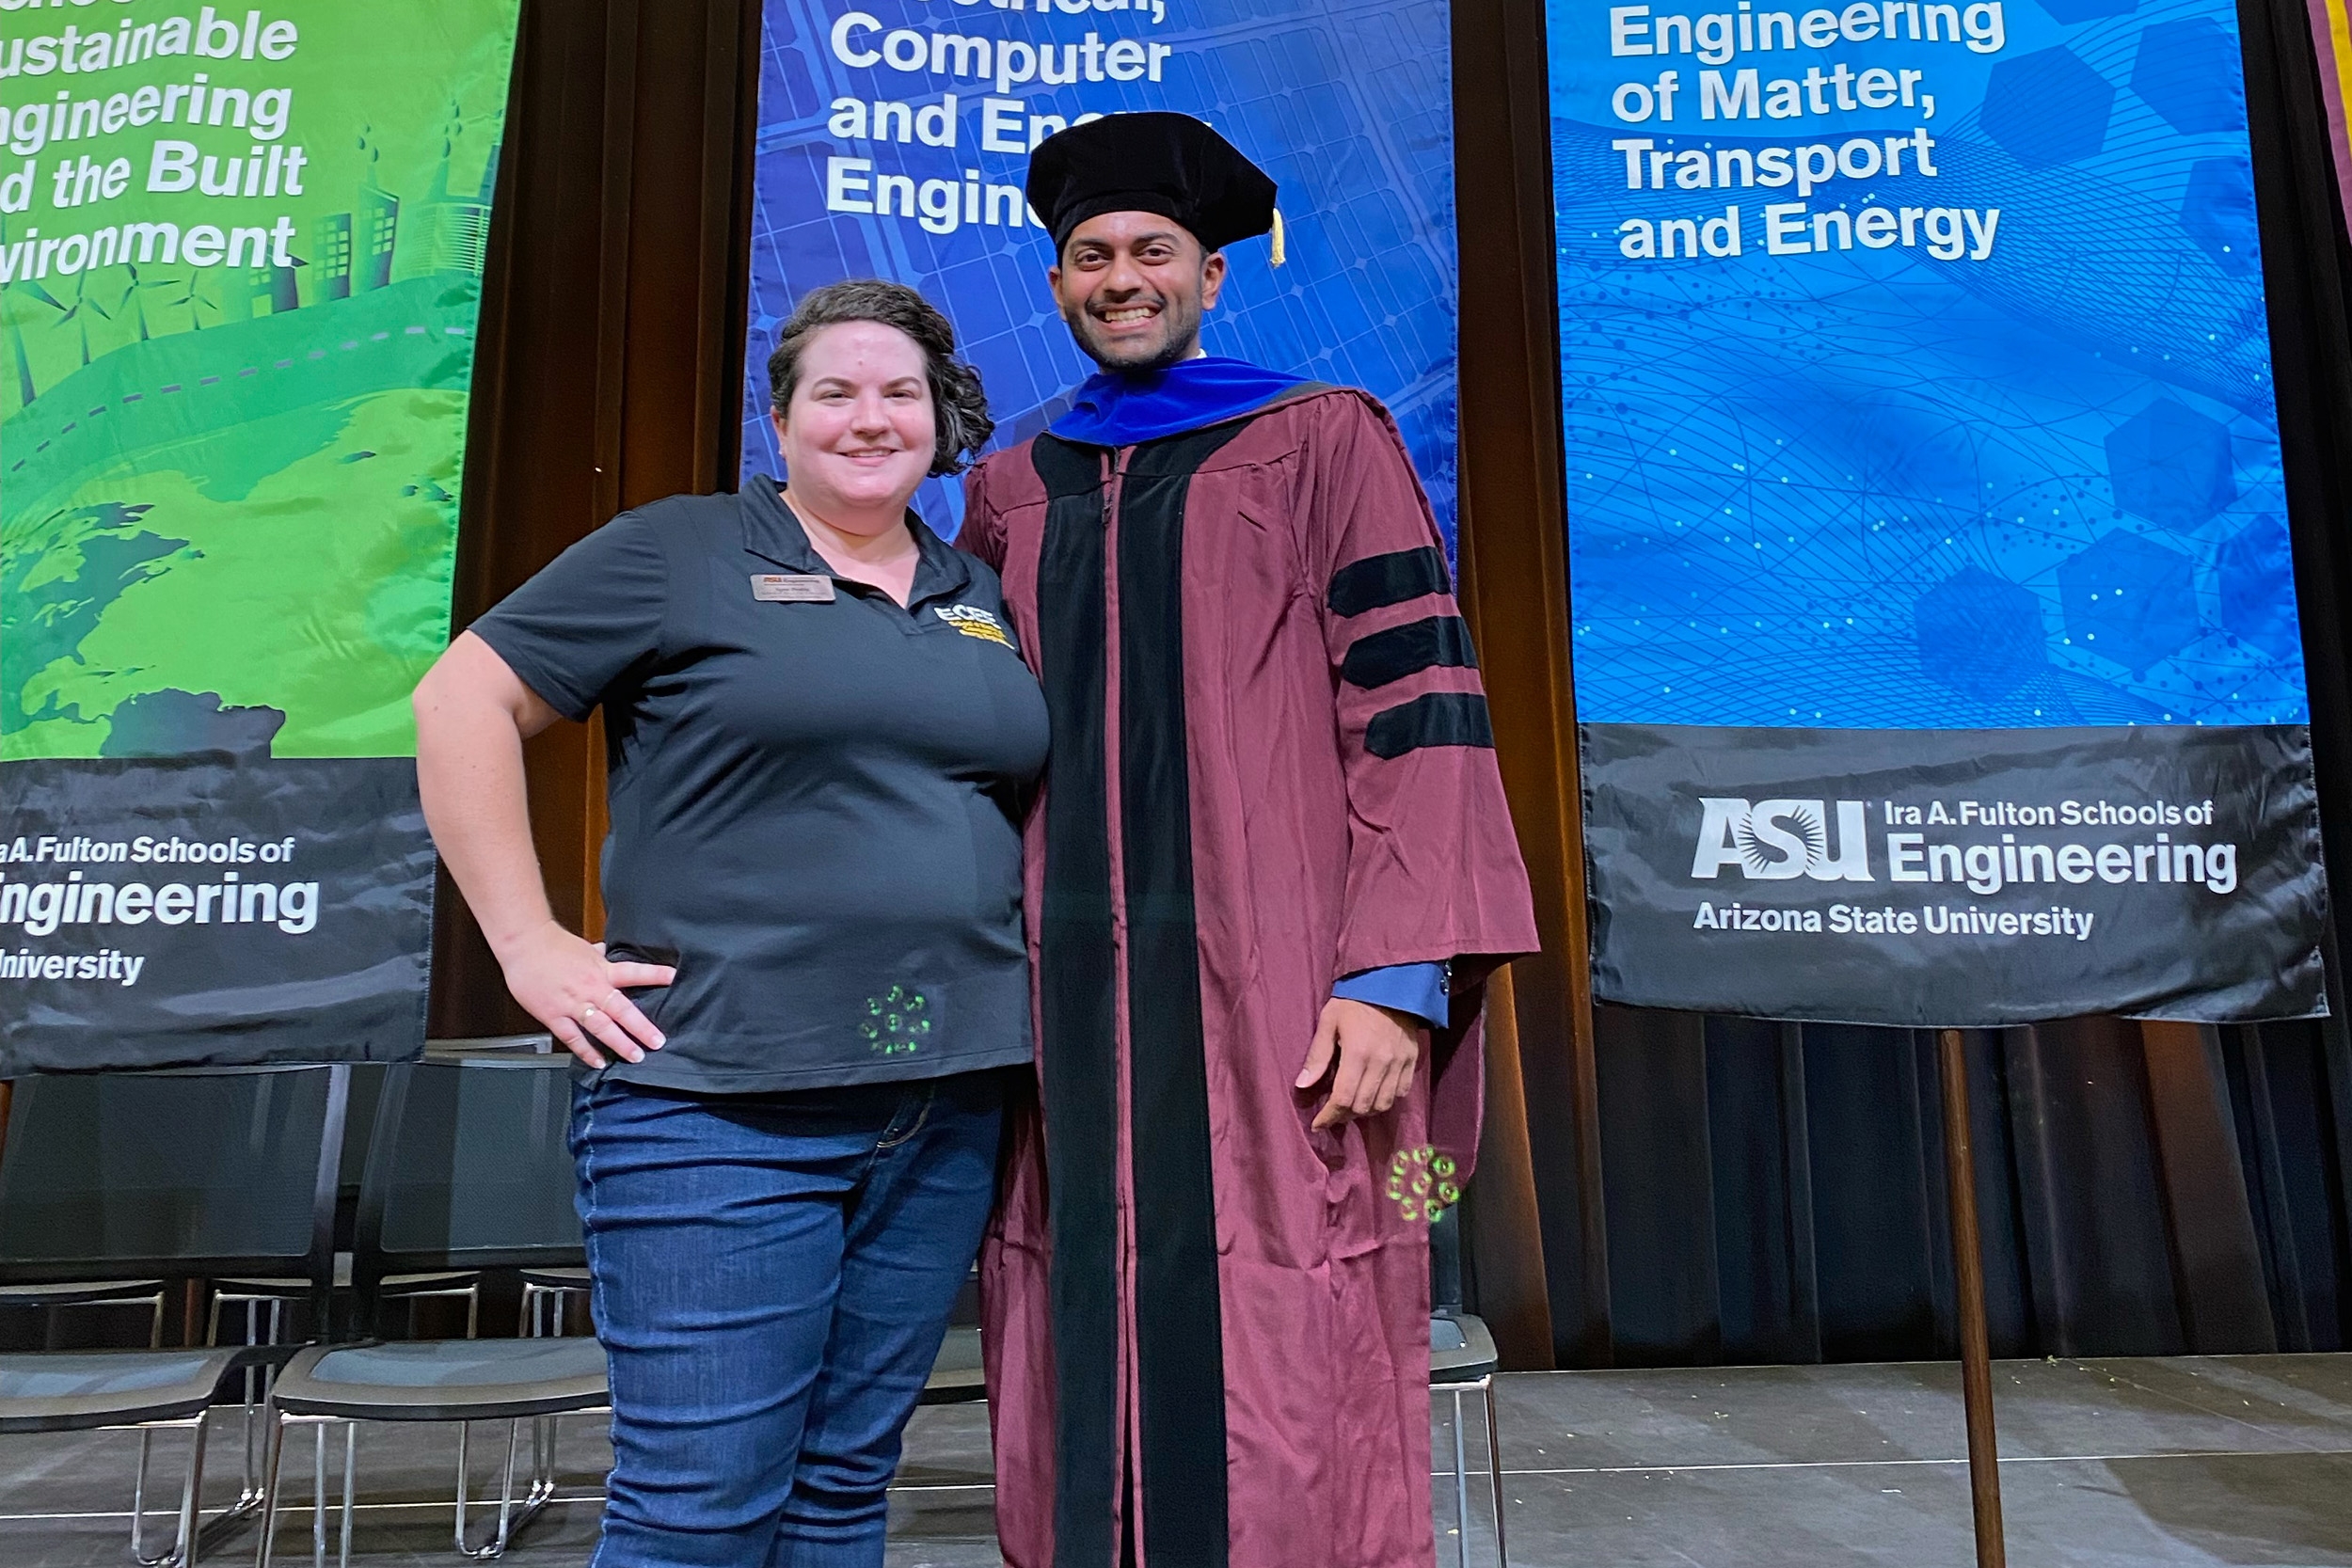 Lynn Pratte poses to the left with Venkatraman Balasubramanian, who is wearing a graduation gown at stole, on stage with ASU banners behind them.